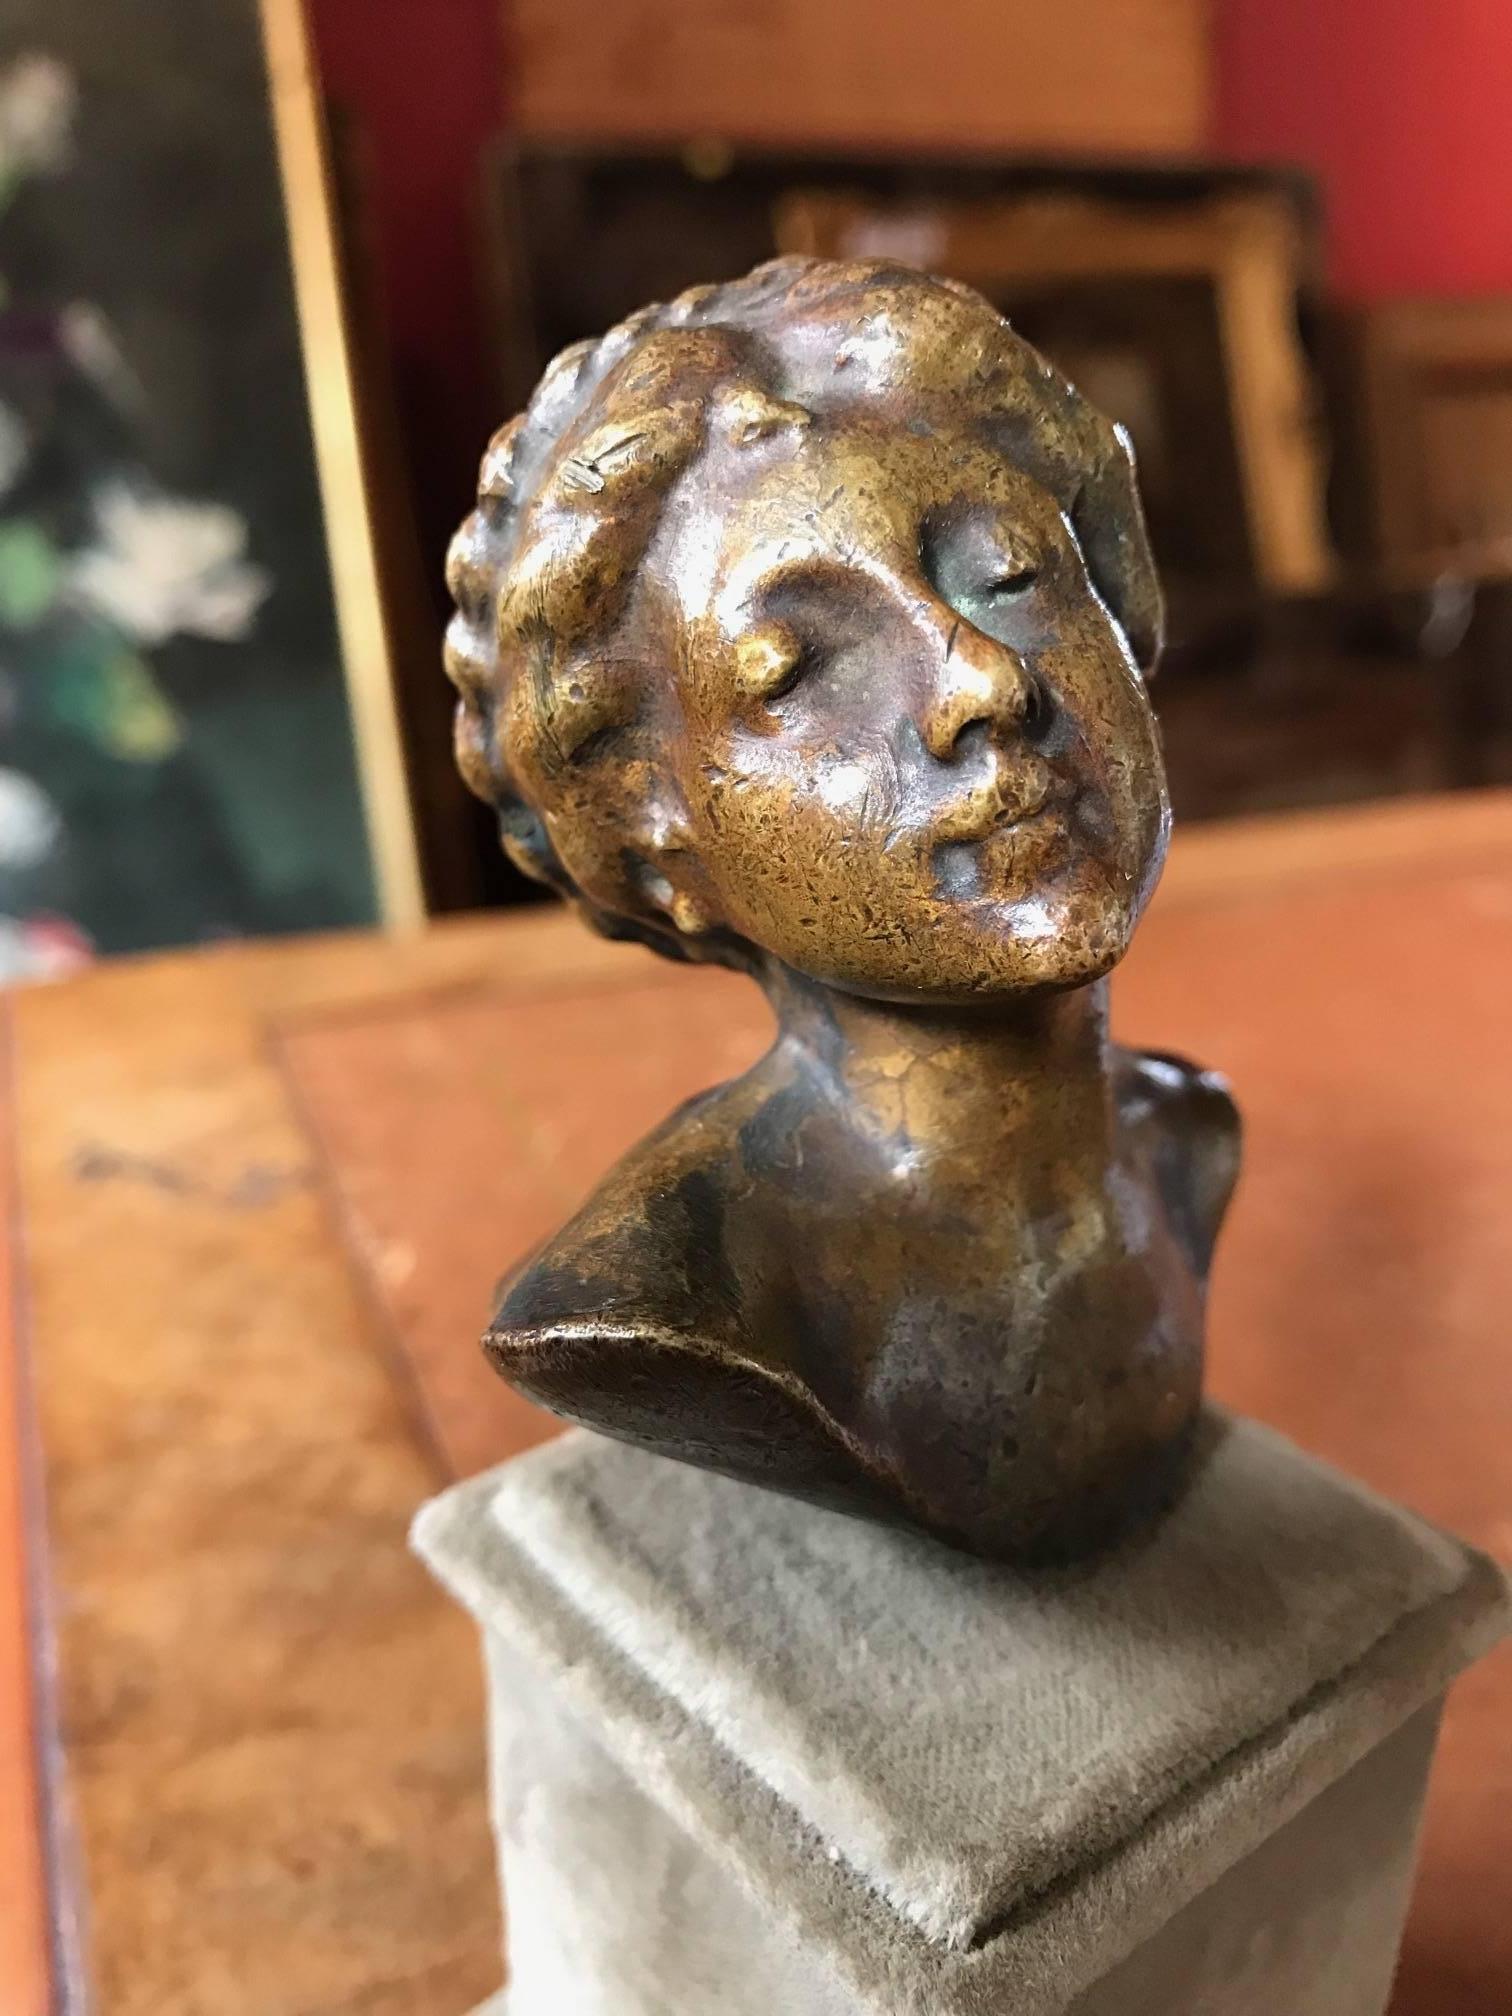 Very fine quality brass sculpture of a lady with braided hair. The work is of French authorship and dates to the early 1900's period. 

Cast in brass and mounted on this grey felt plinth, the work is of exceptional quality and clearly by a very good